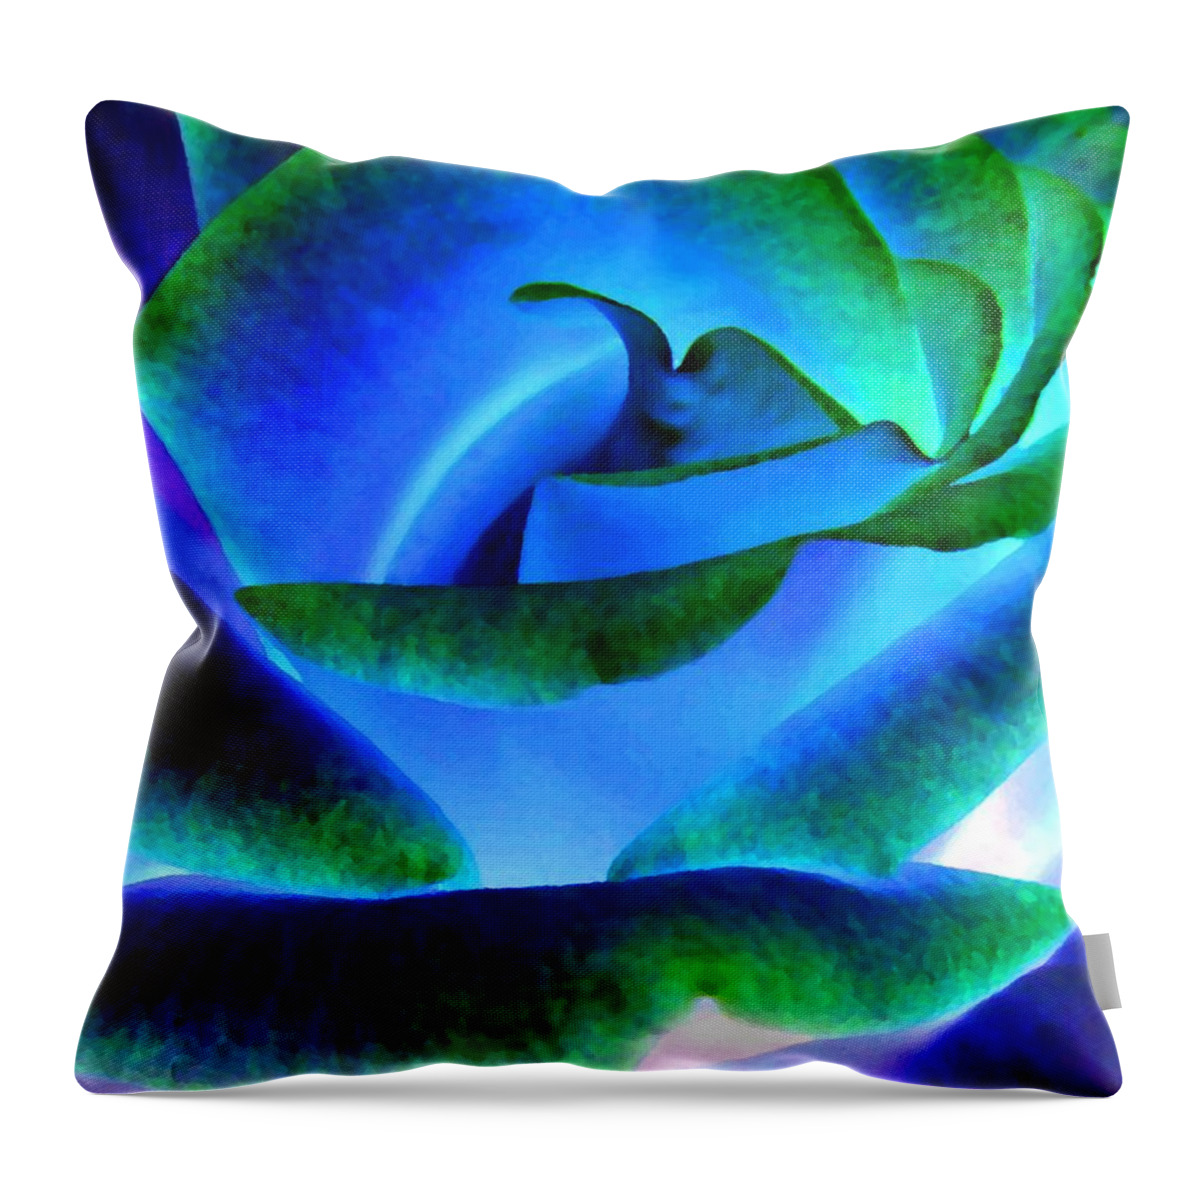 Northern Lights Rose Throw Pillow featuring the digital art Northern Lights Rose by Will Borden